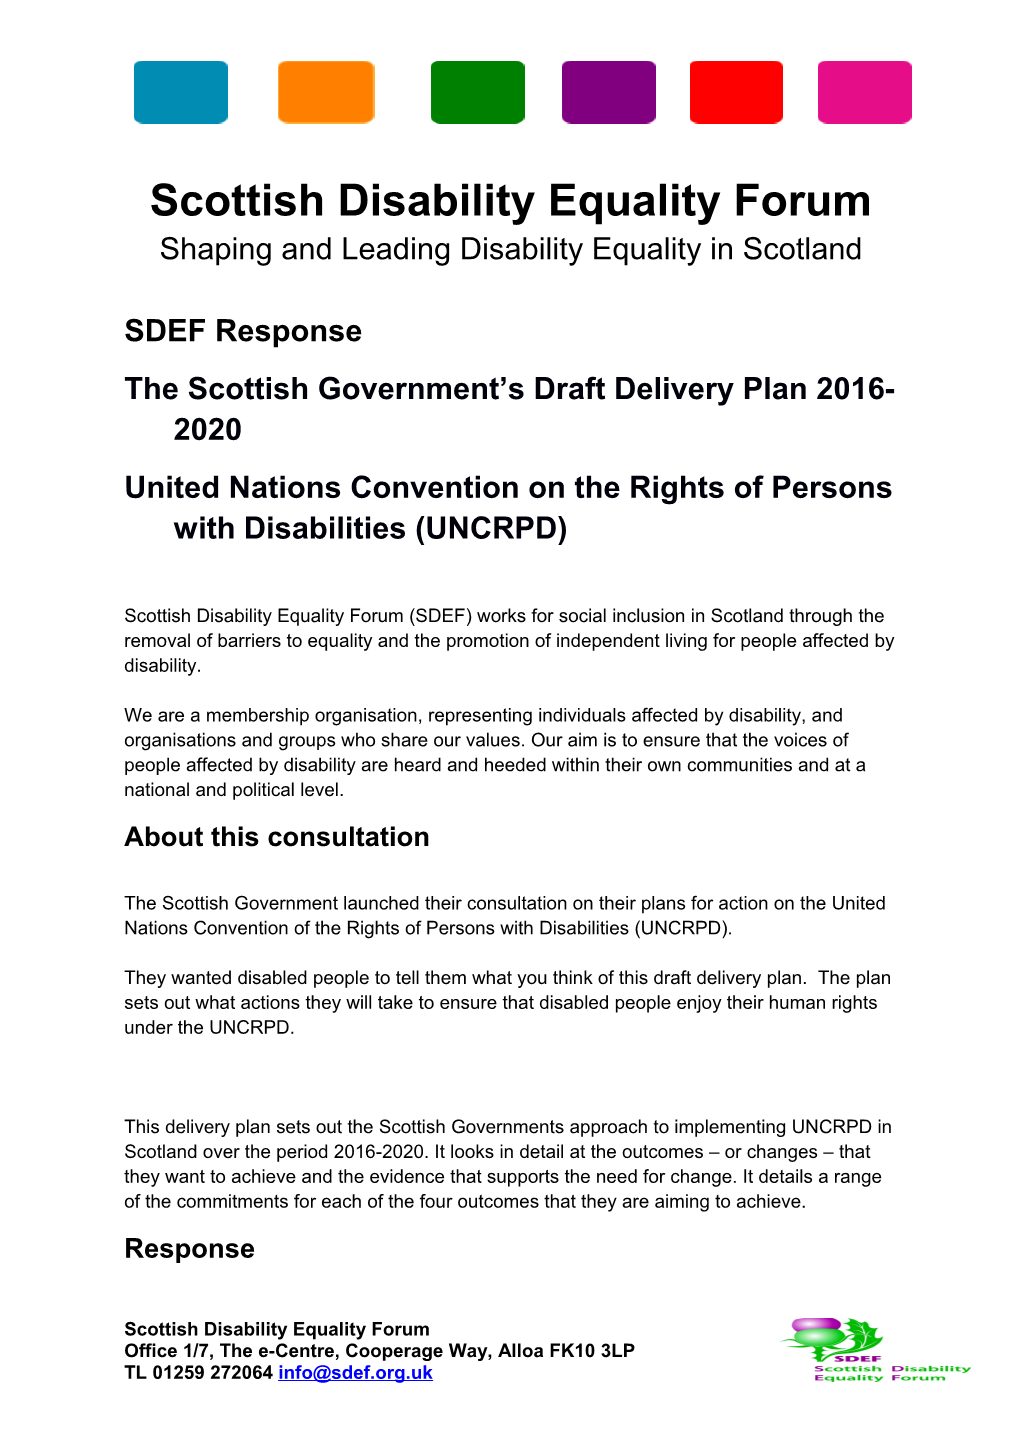 The Scottish Government S Draft Delivery Plan 2016-2020